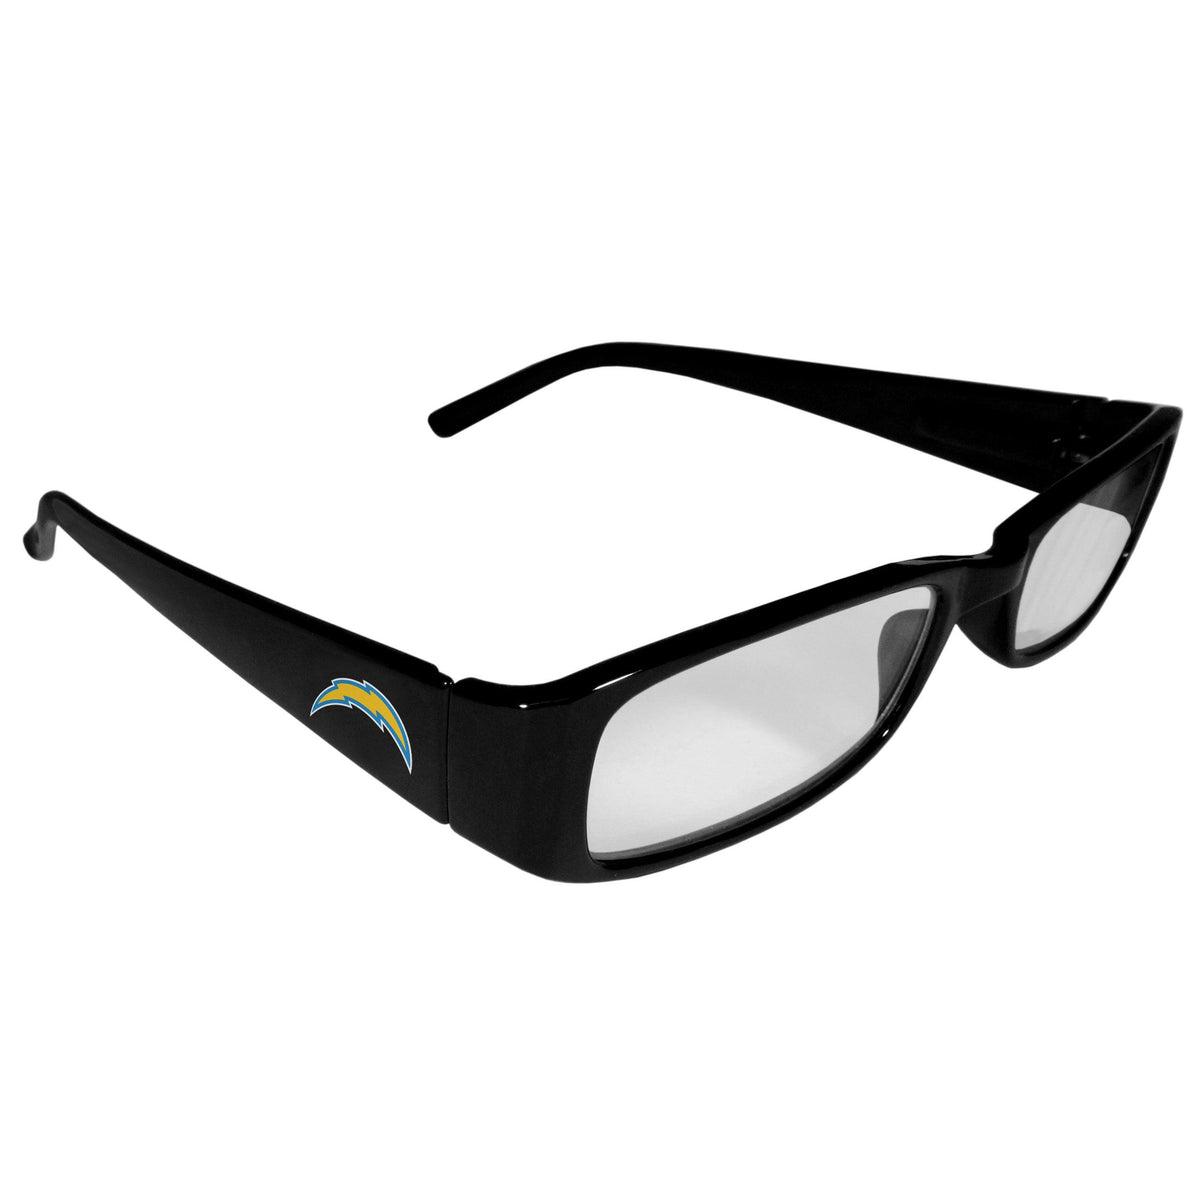 Los Angeles Chargers Printed Reading Glasses, +1.25 - Flyclothing LLC